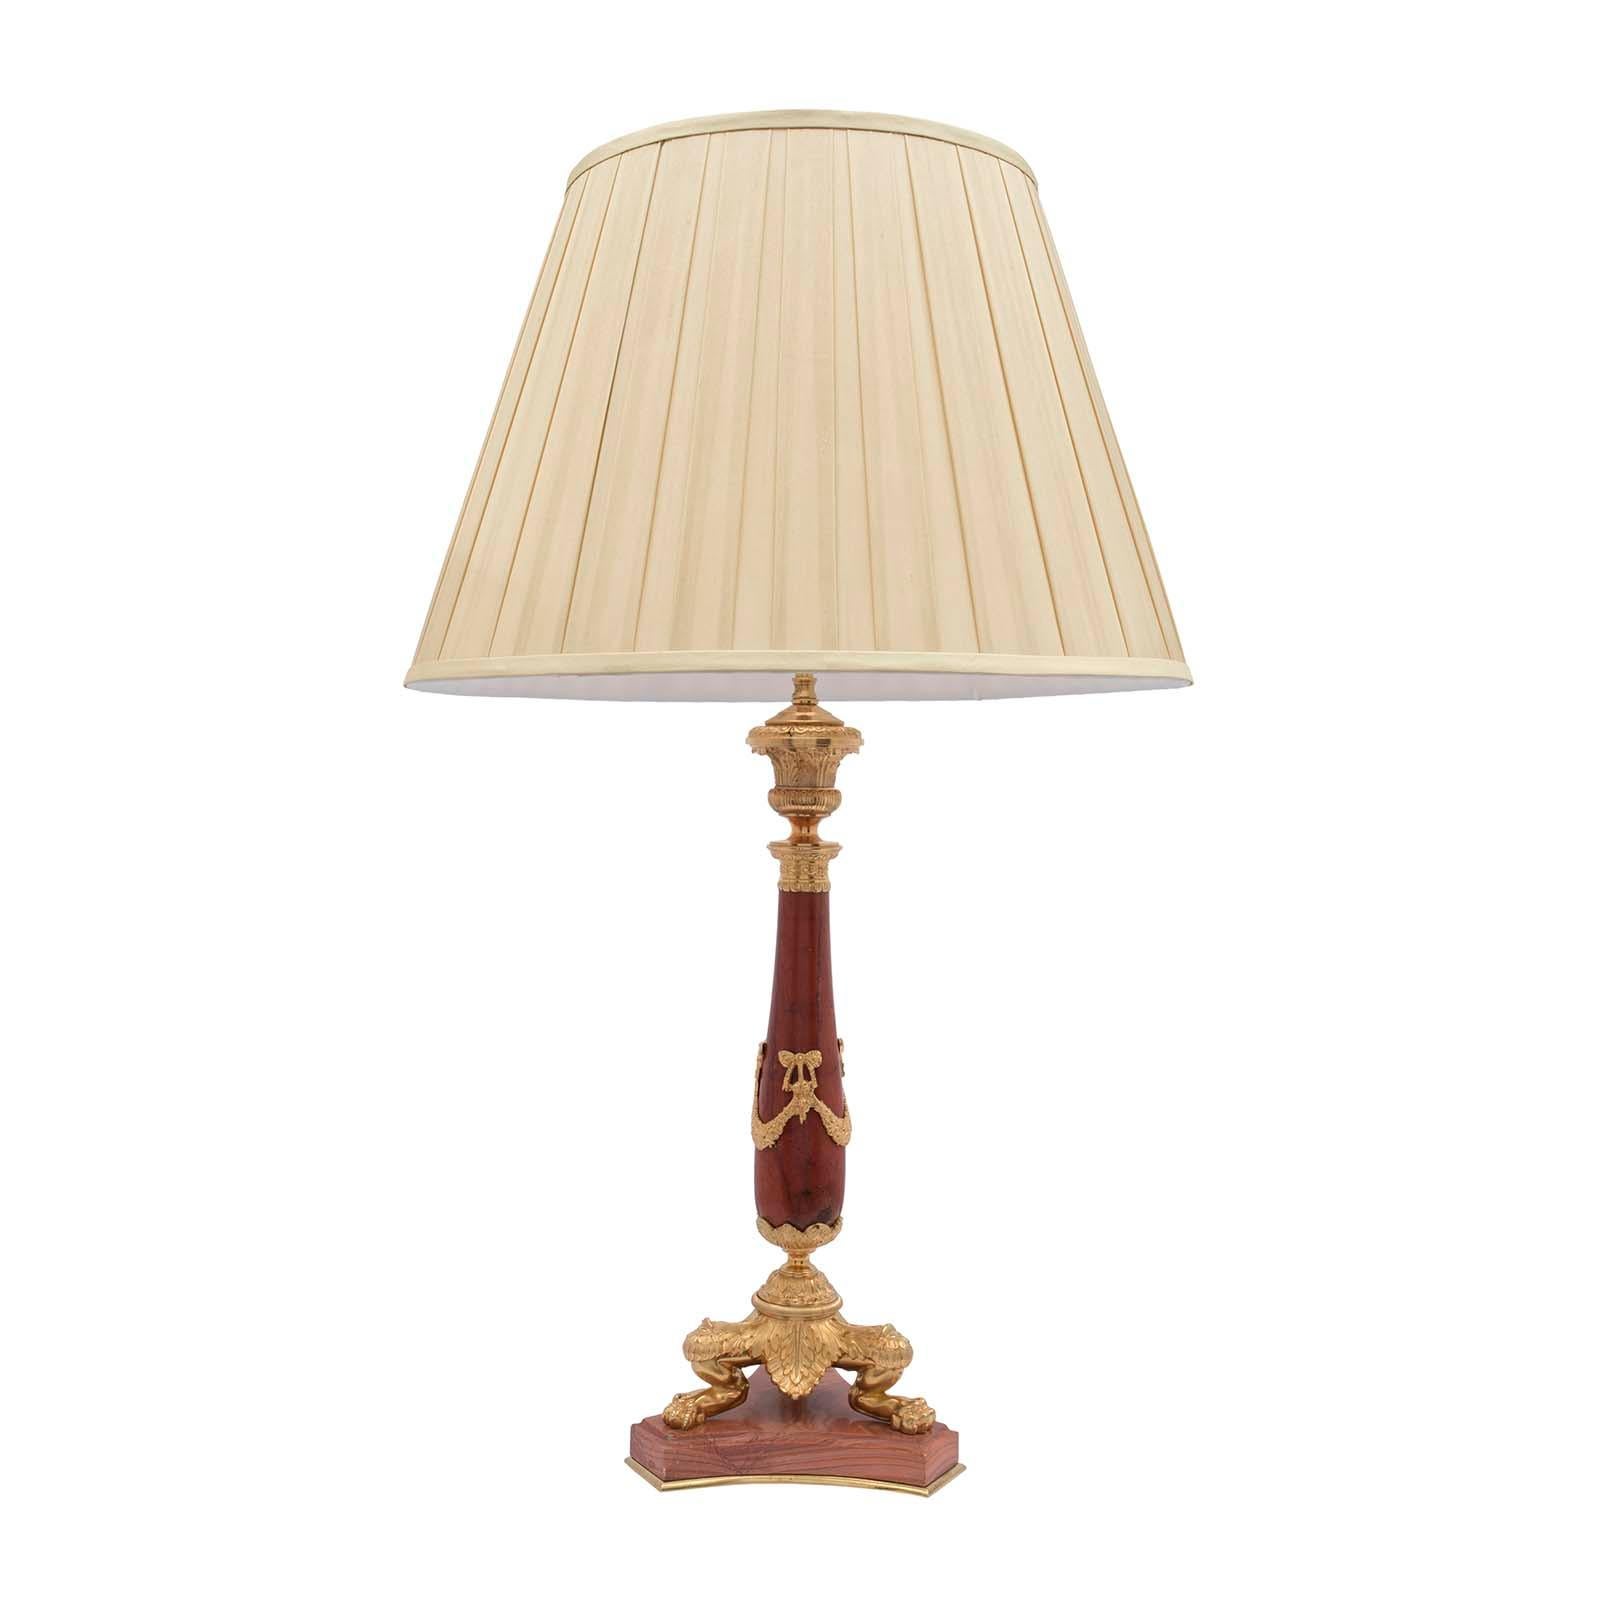 A handsome French 19th century neo-classical st. red marble and ormolu lamp. The lamp is raised by a triangular marble base with concave sides, a mottled border and a bottom ormolu filet. At the base are three richly chased ormolu paw feet amidst